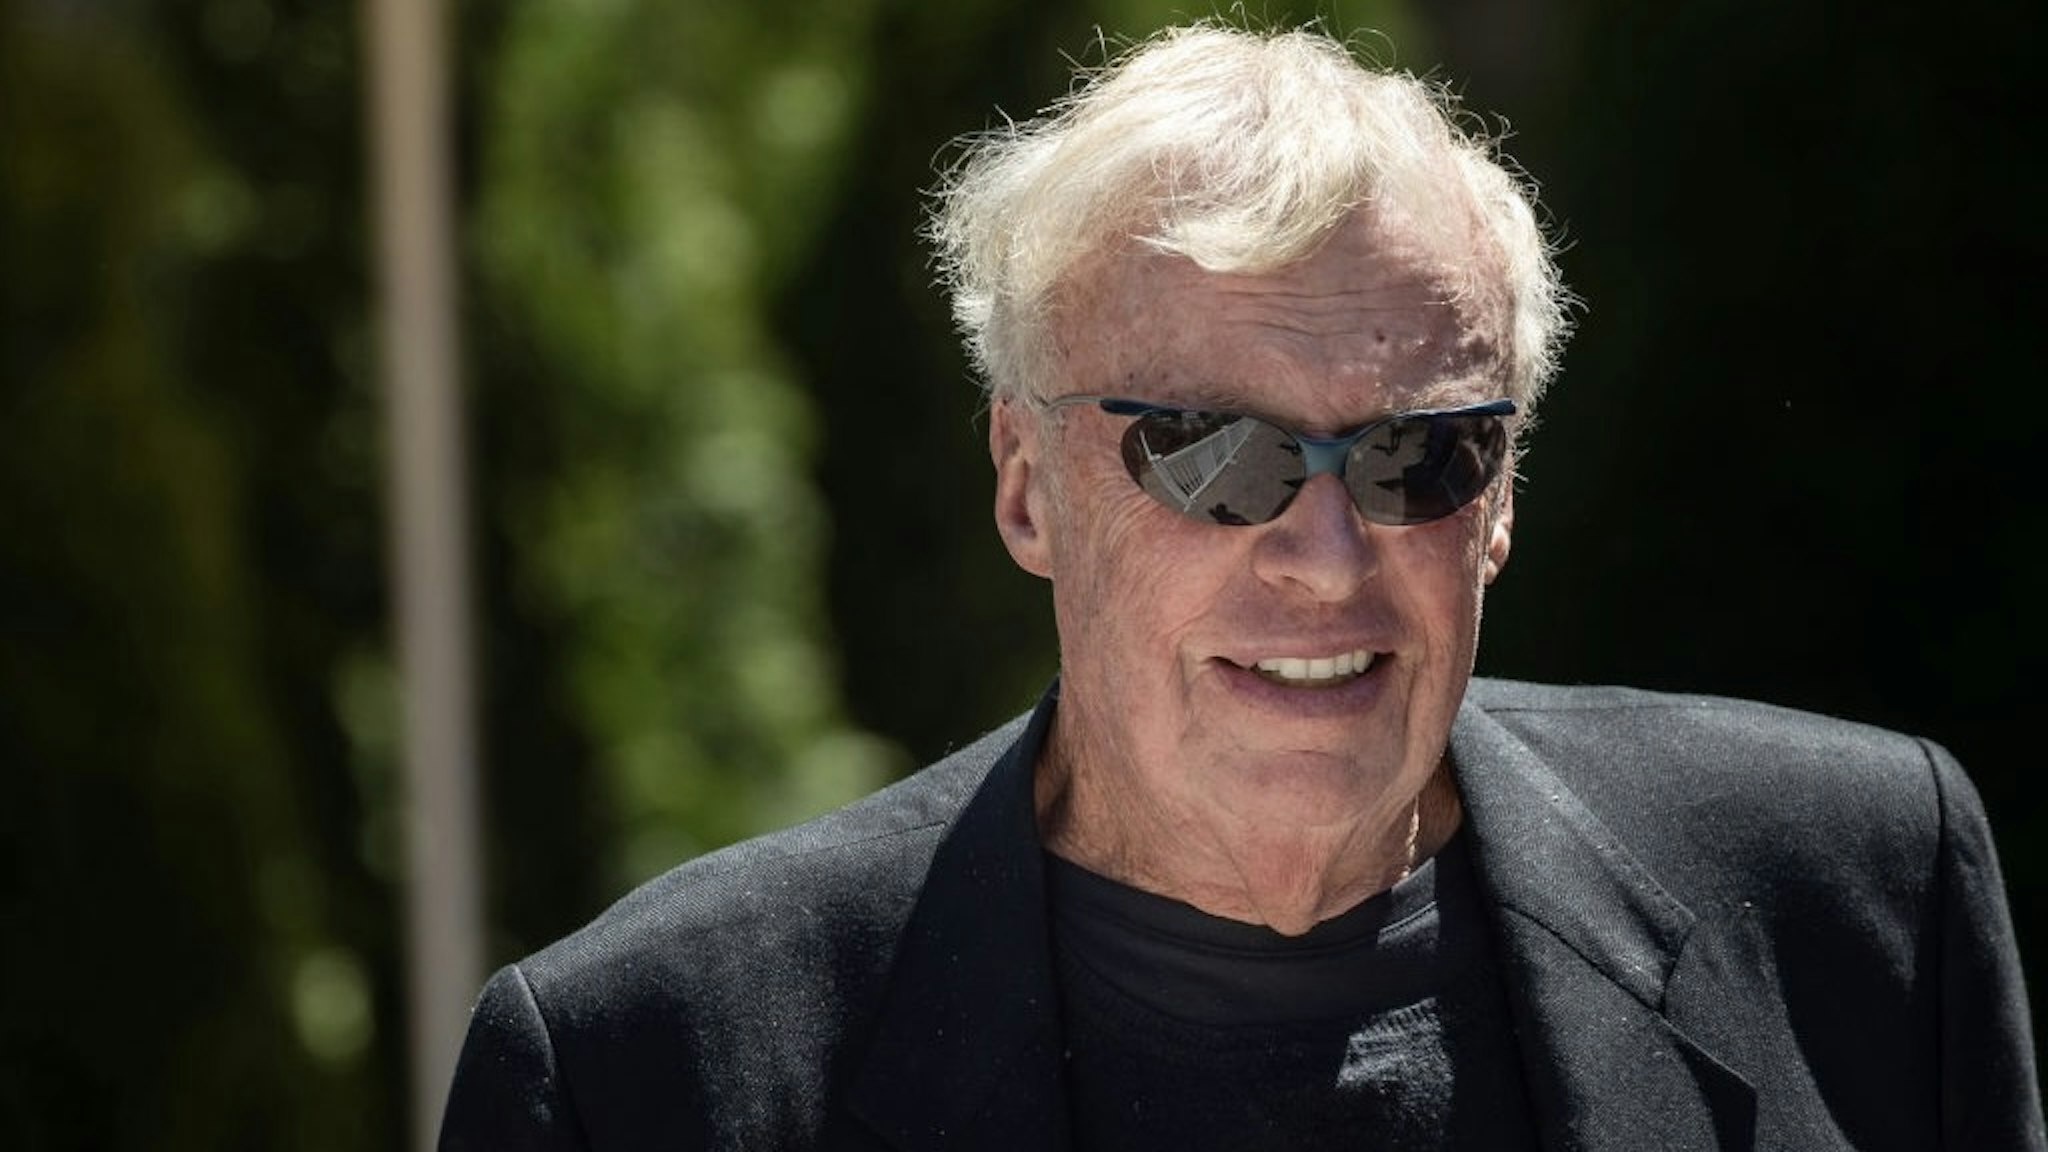 Allen & Co. Holds Its Annual Sun Valley Conference In Idaho SUN VALLEY, ID - JULY 11: Phil Knight, co-founder and chairman emeritus of Nike, attends the annual Allen & Company Sun Valley Conference, July 11, 2019 in Sun Valley, Idaho. Every July, some of the world's most wealthy and powerful businesspeople from the media, finance, and technology spheres converge at the Sun Valley Resort for the exclusive weeklong conference. (Photo by Drew Angerer/Getty Images) Drew Angerer / Staff